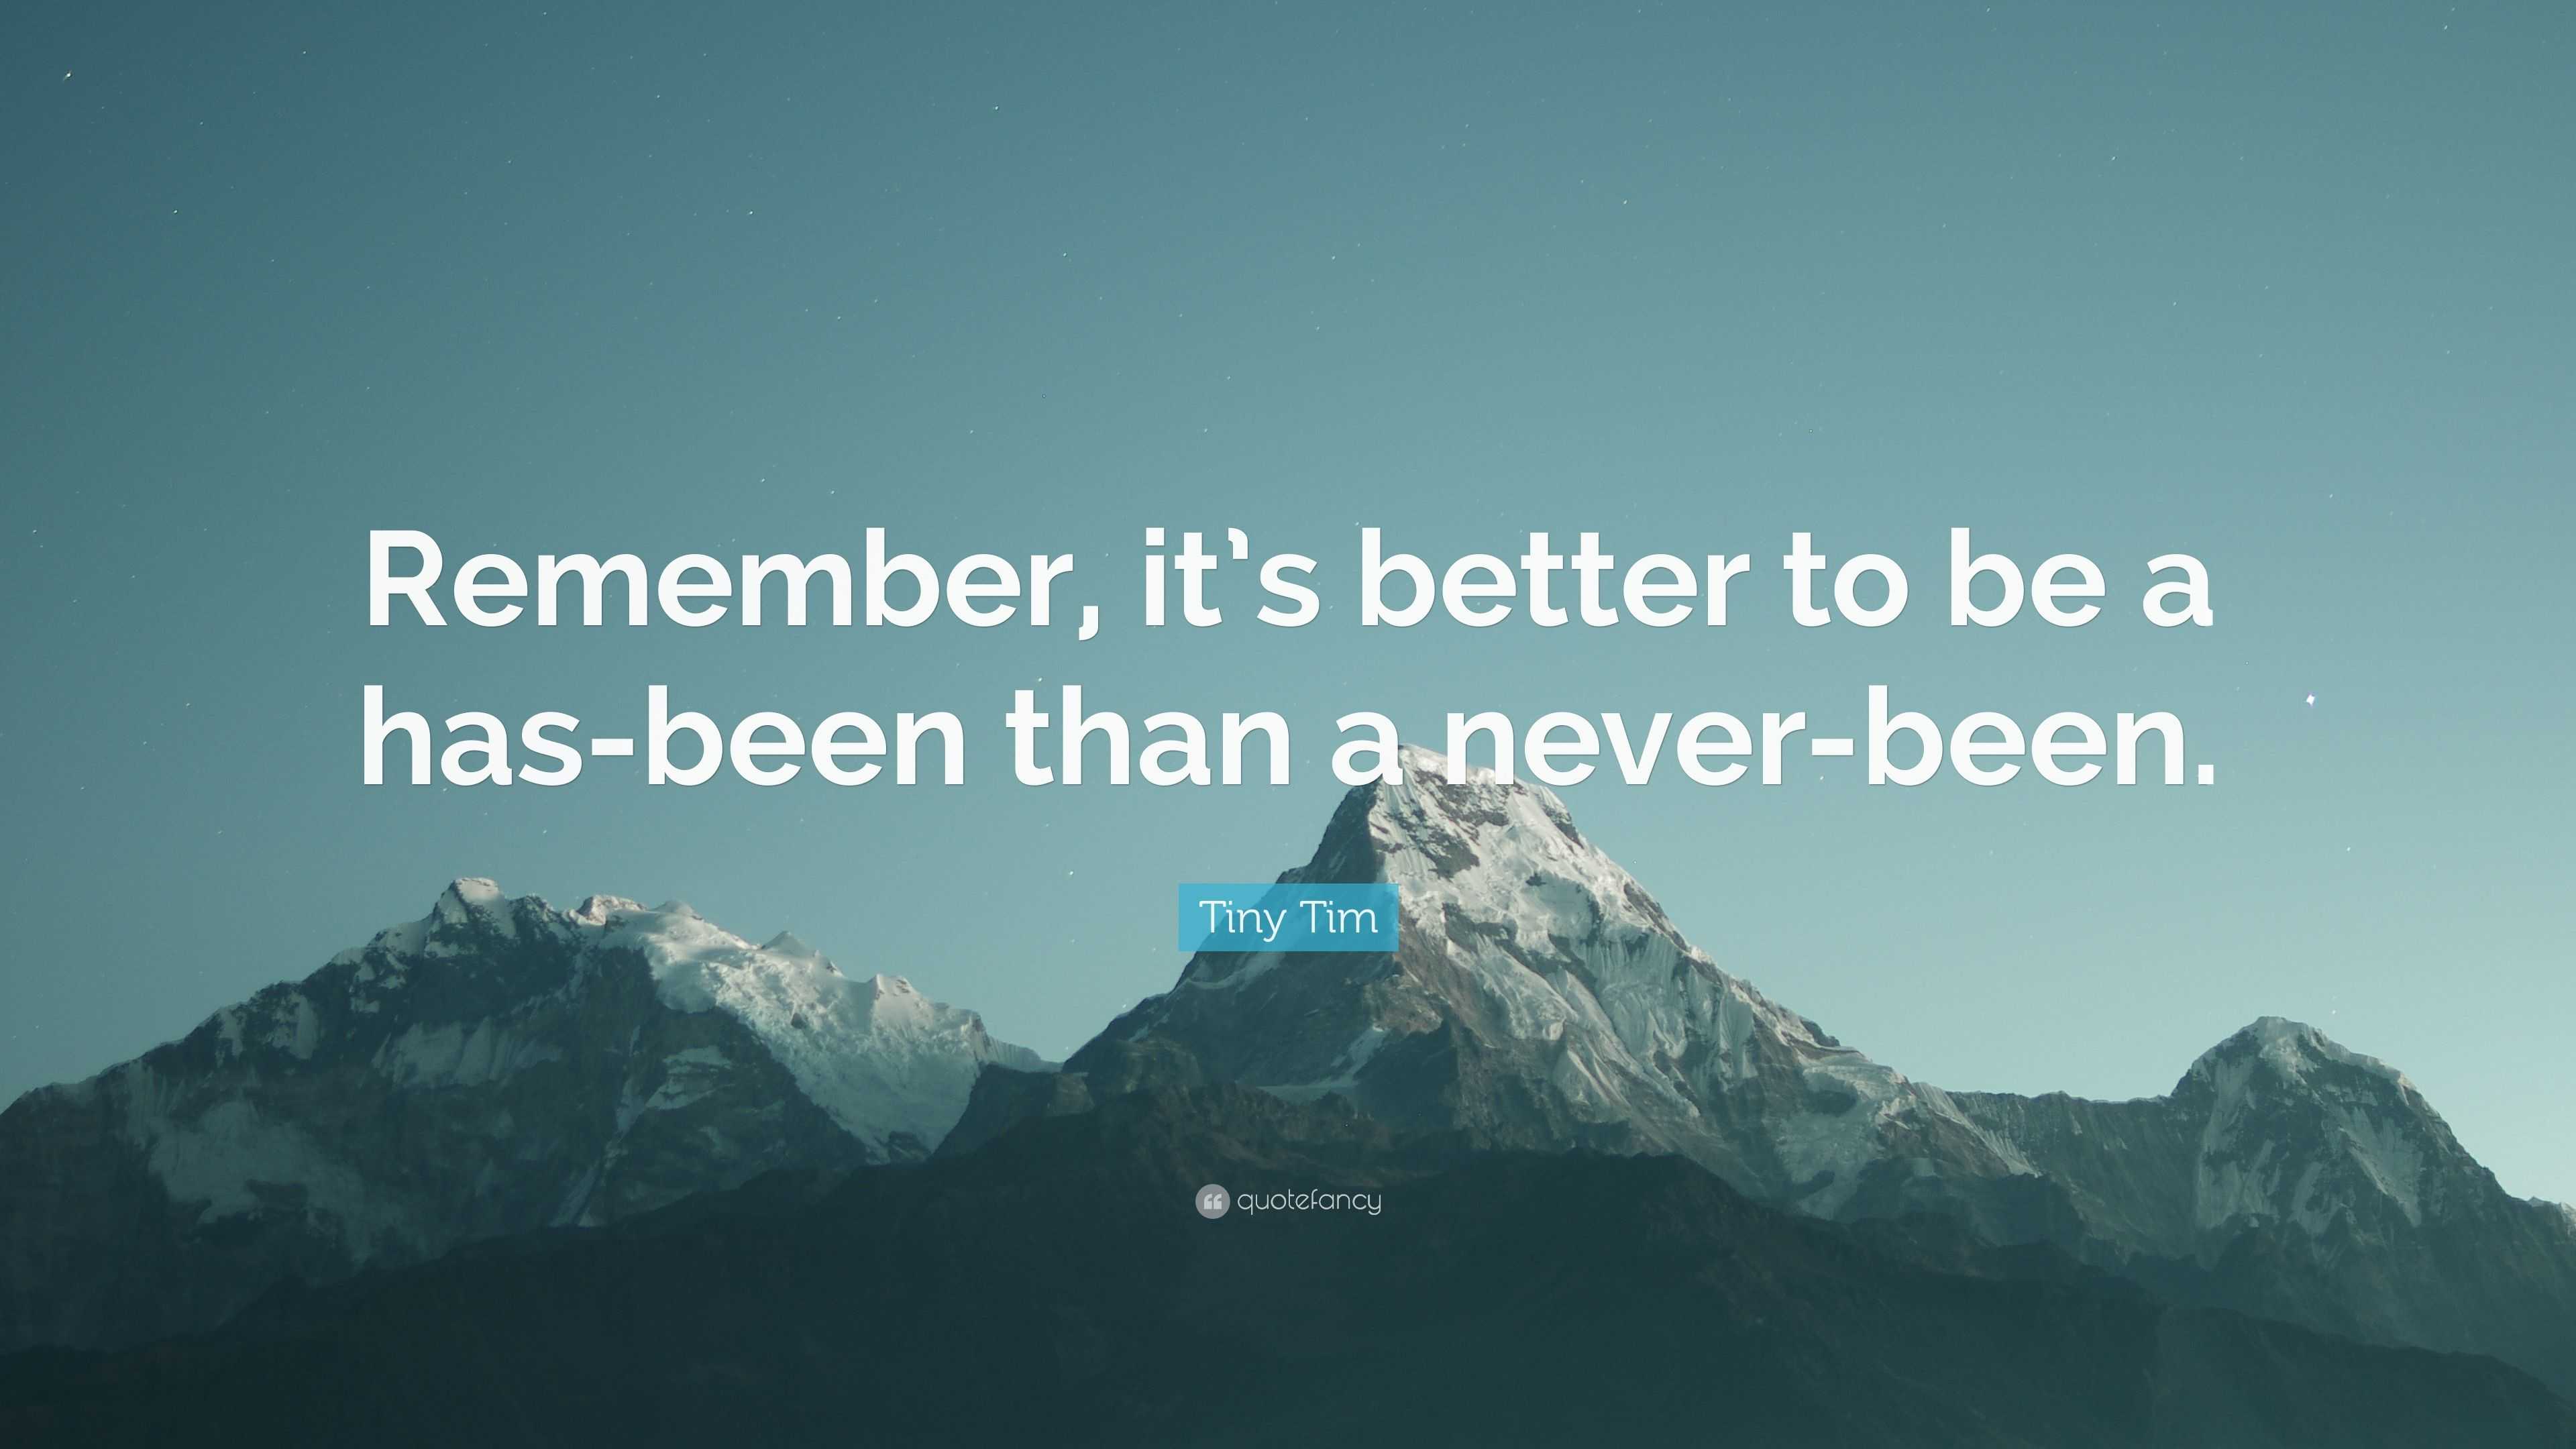 Tiny Tim Quote: "Remember, it's better to be a has-been than a never-been."